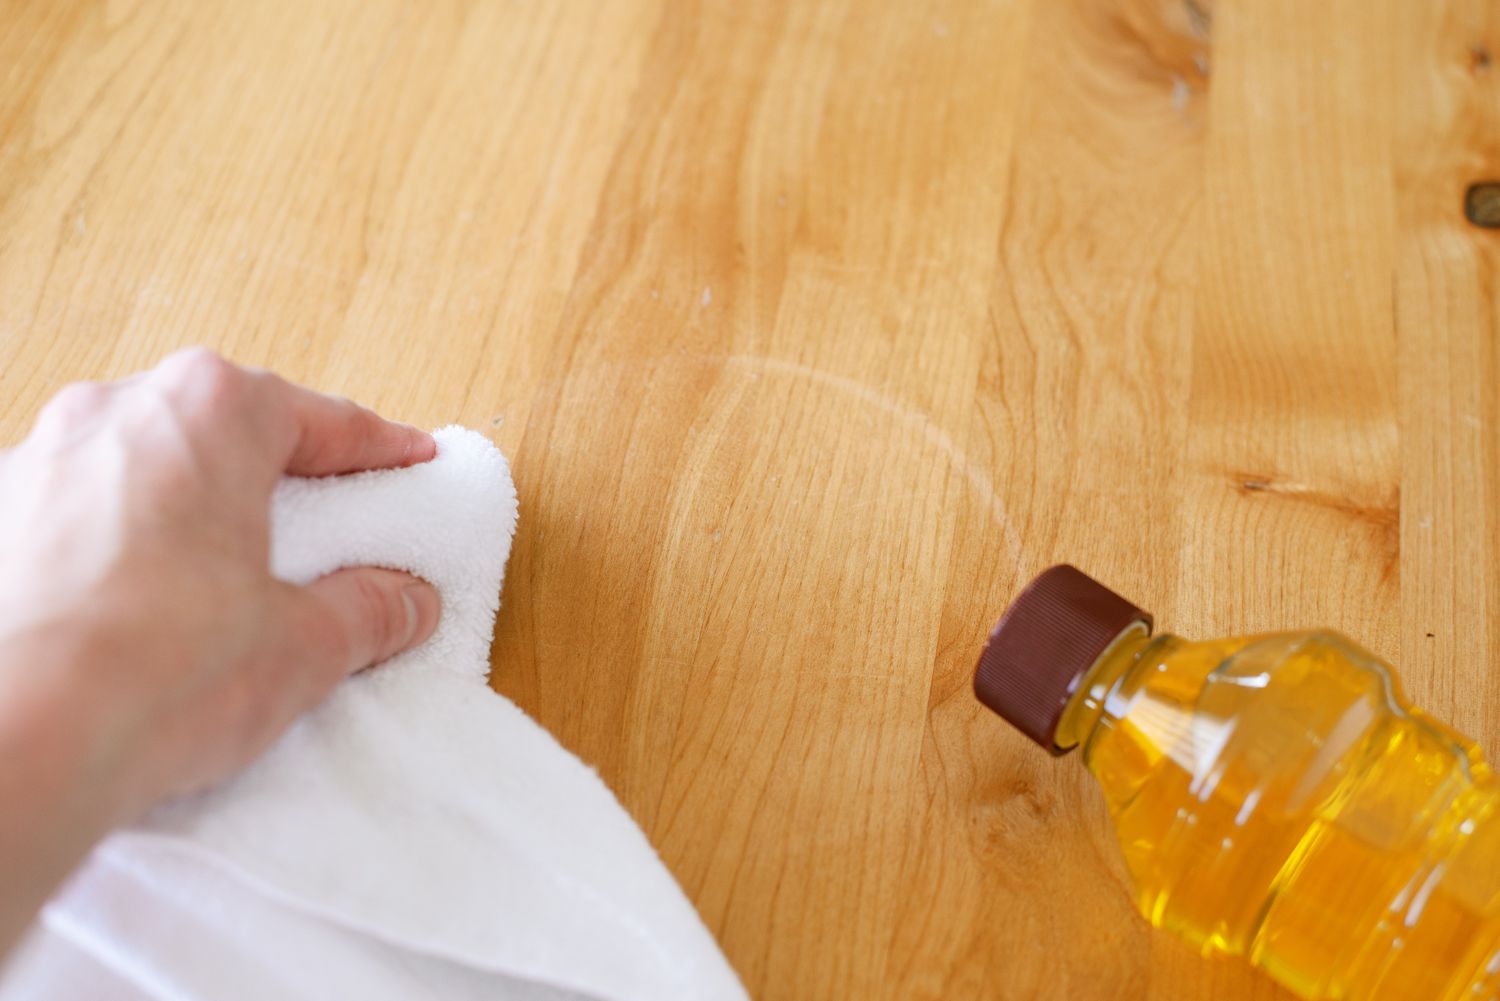 How To Remove Water Stains On Wood Furniture